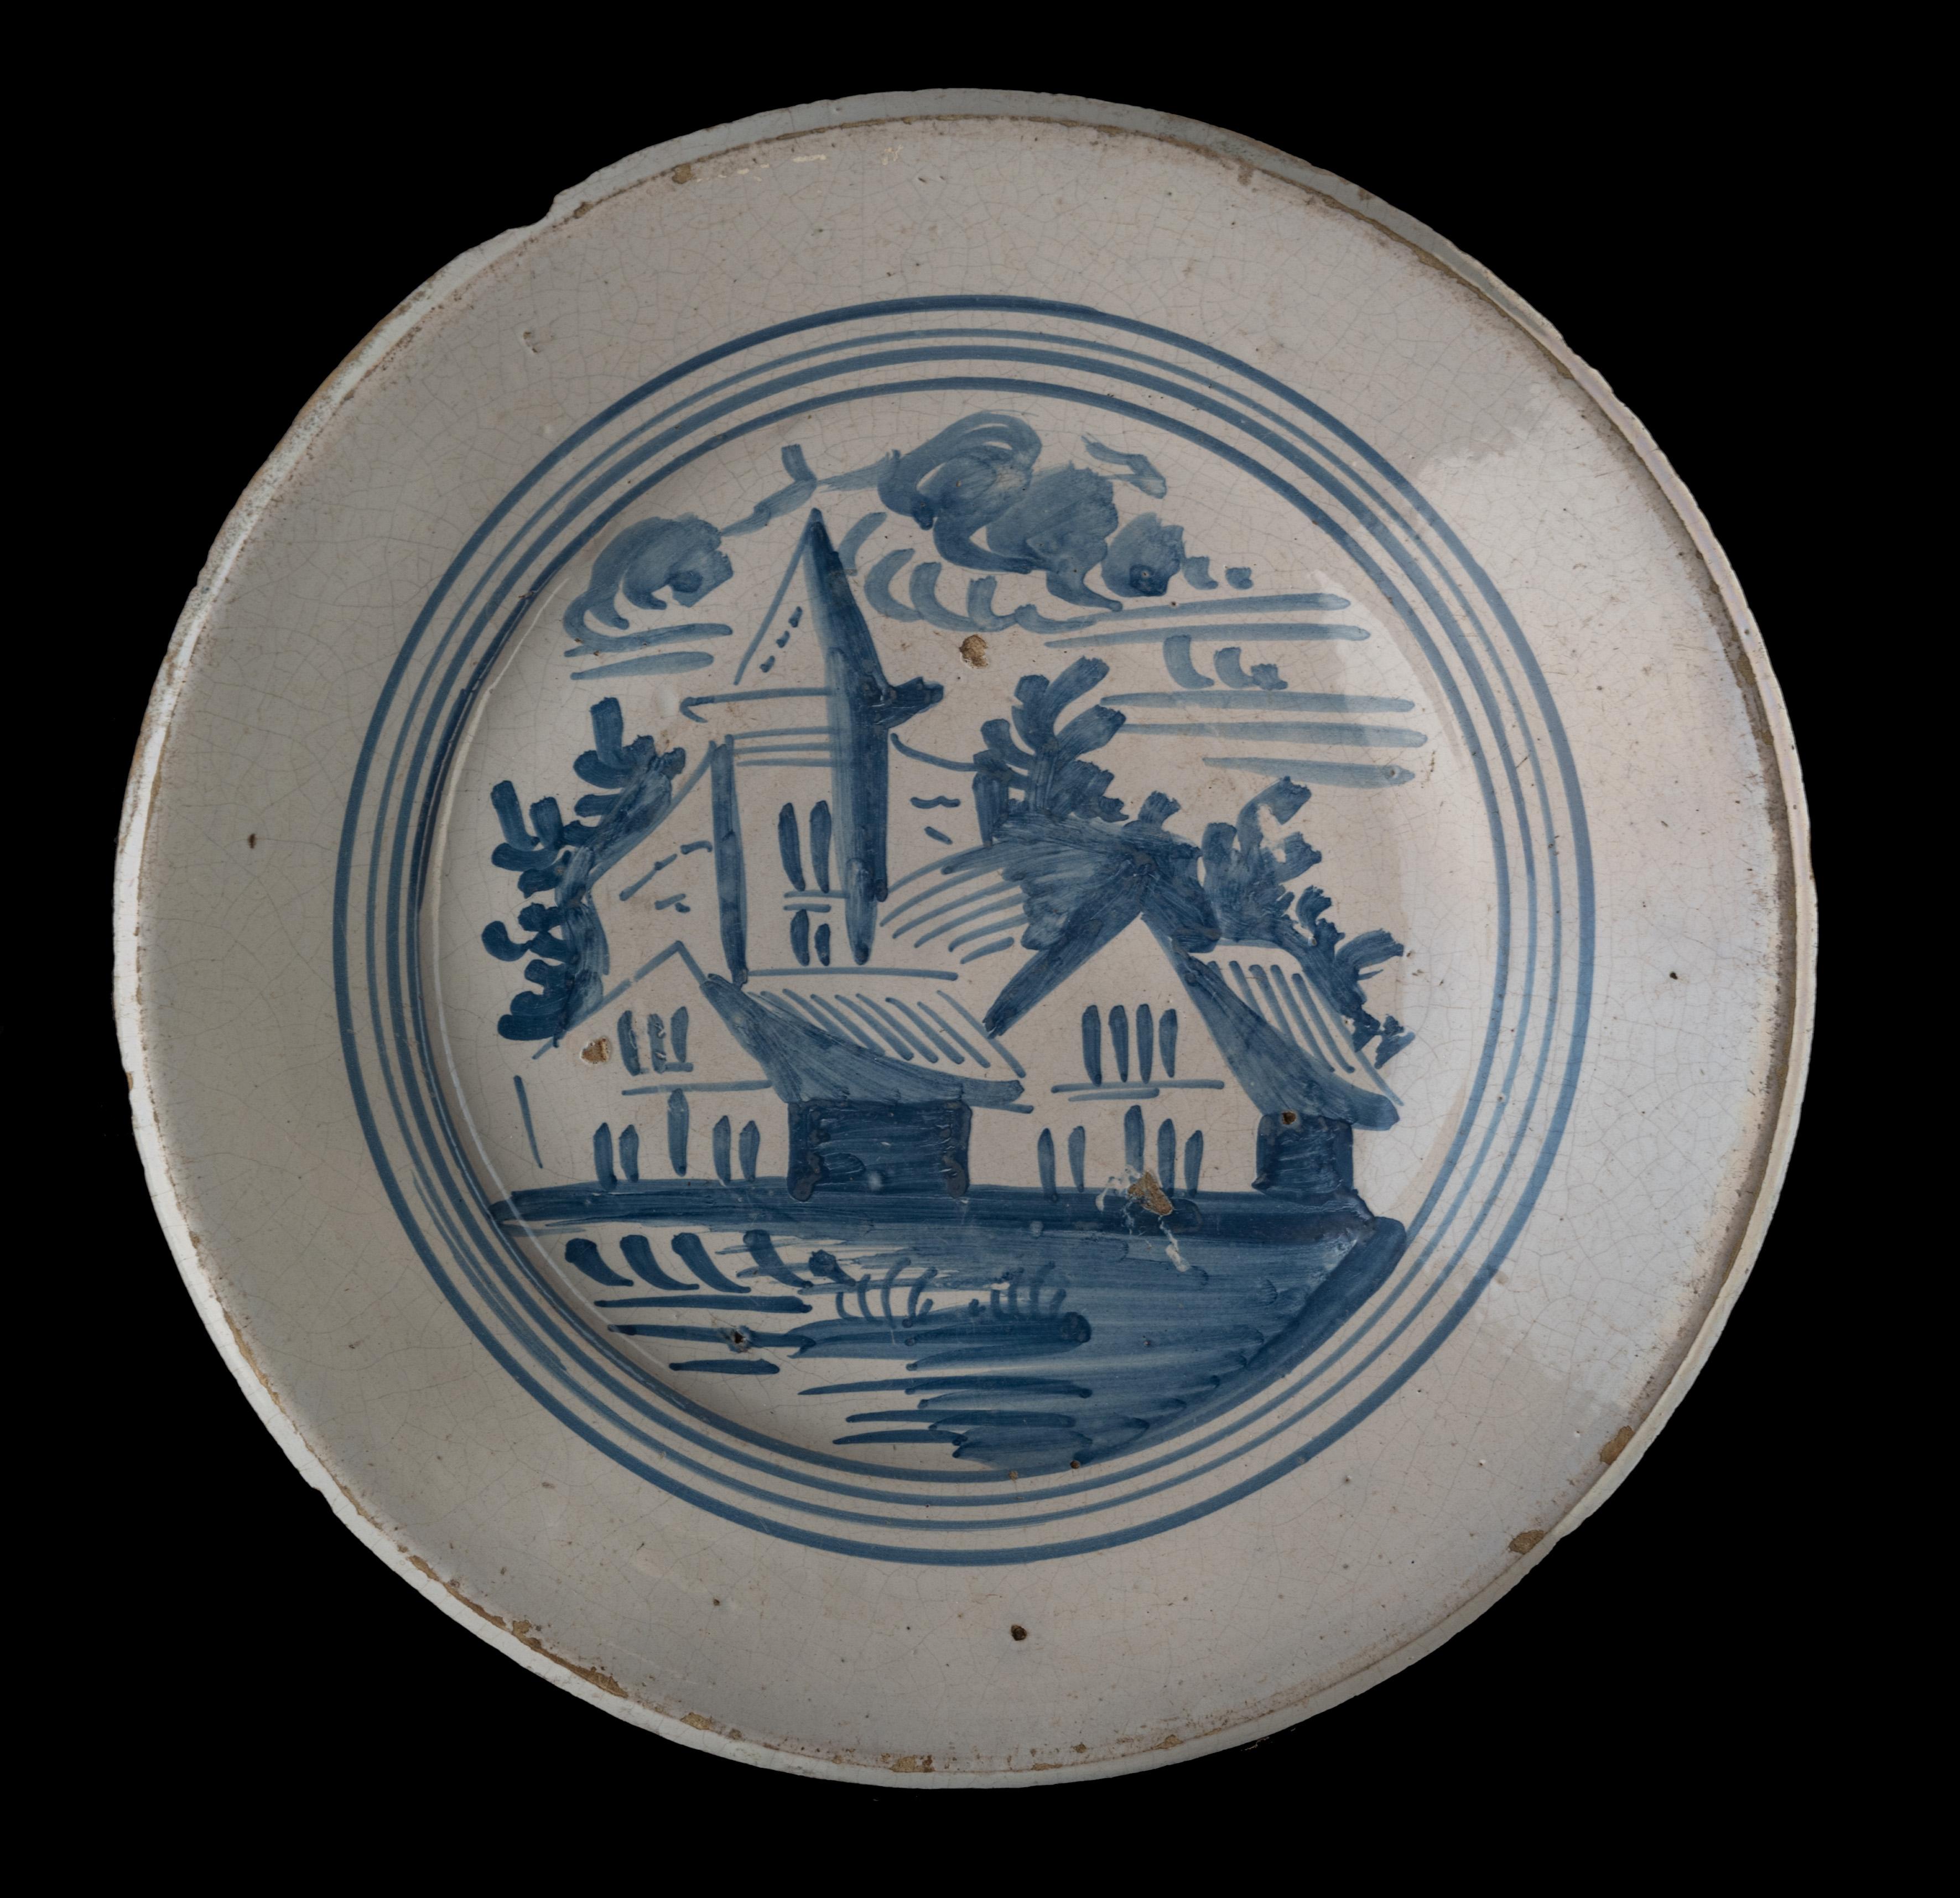 Blue and white landscape dish. Makkum, 1775-1800 
Tichelaar pottery. painter: Douwe Klases Hofstra [attributed to] 

The dish has a wide and raised flange and is painted in blue with a simplified village view, framed within four circles. The